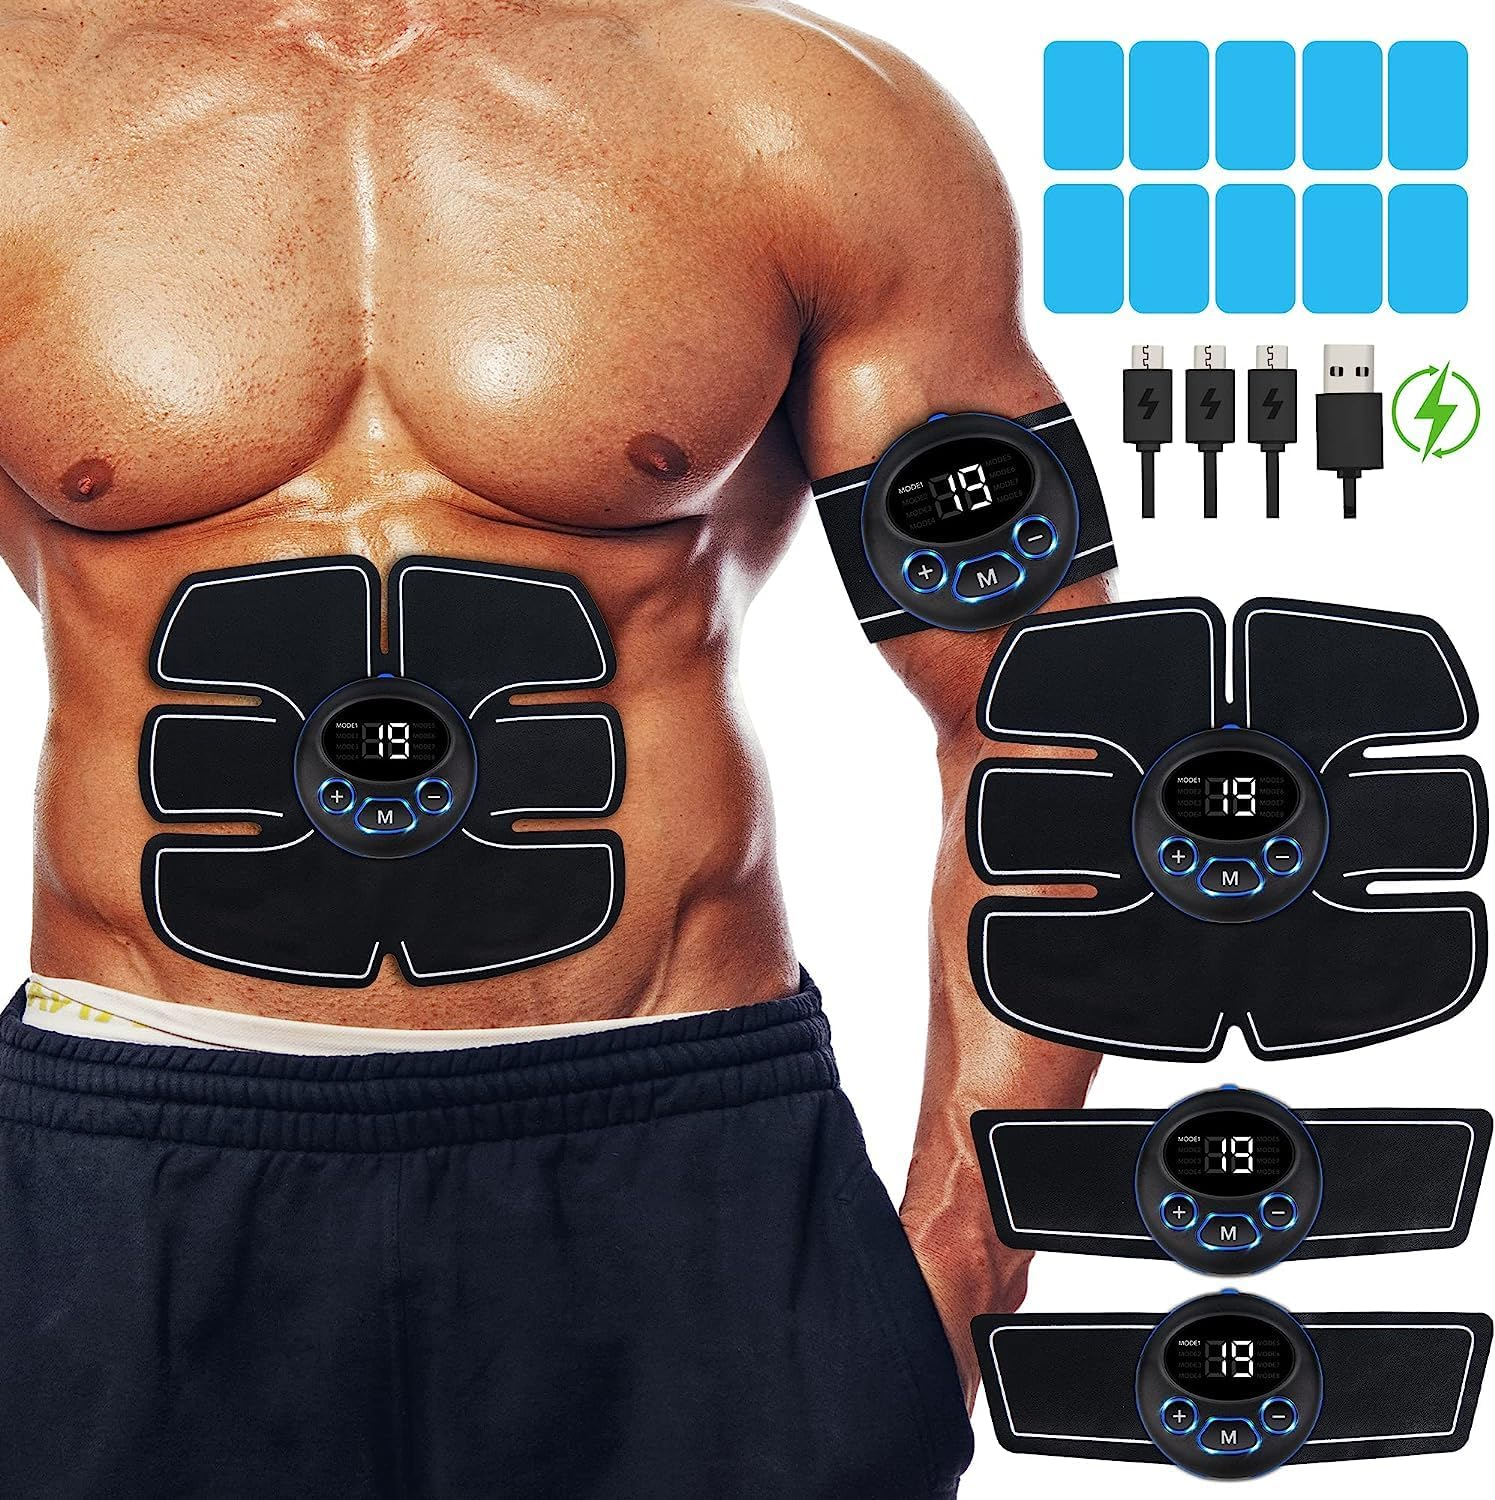 Abdominal Toning: Enhance Your Fitness Regimen, Powerful for Effective Muscle Building and Toning for Weight Loss at Home and Office, Portable Workout Equipment for Men and Women - Black